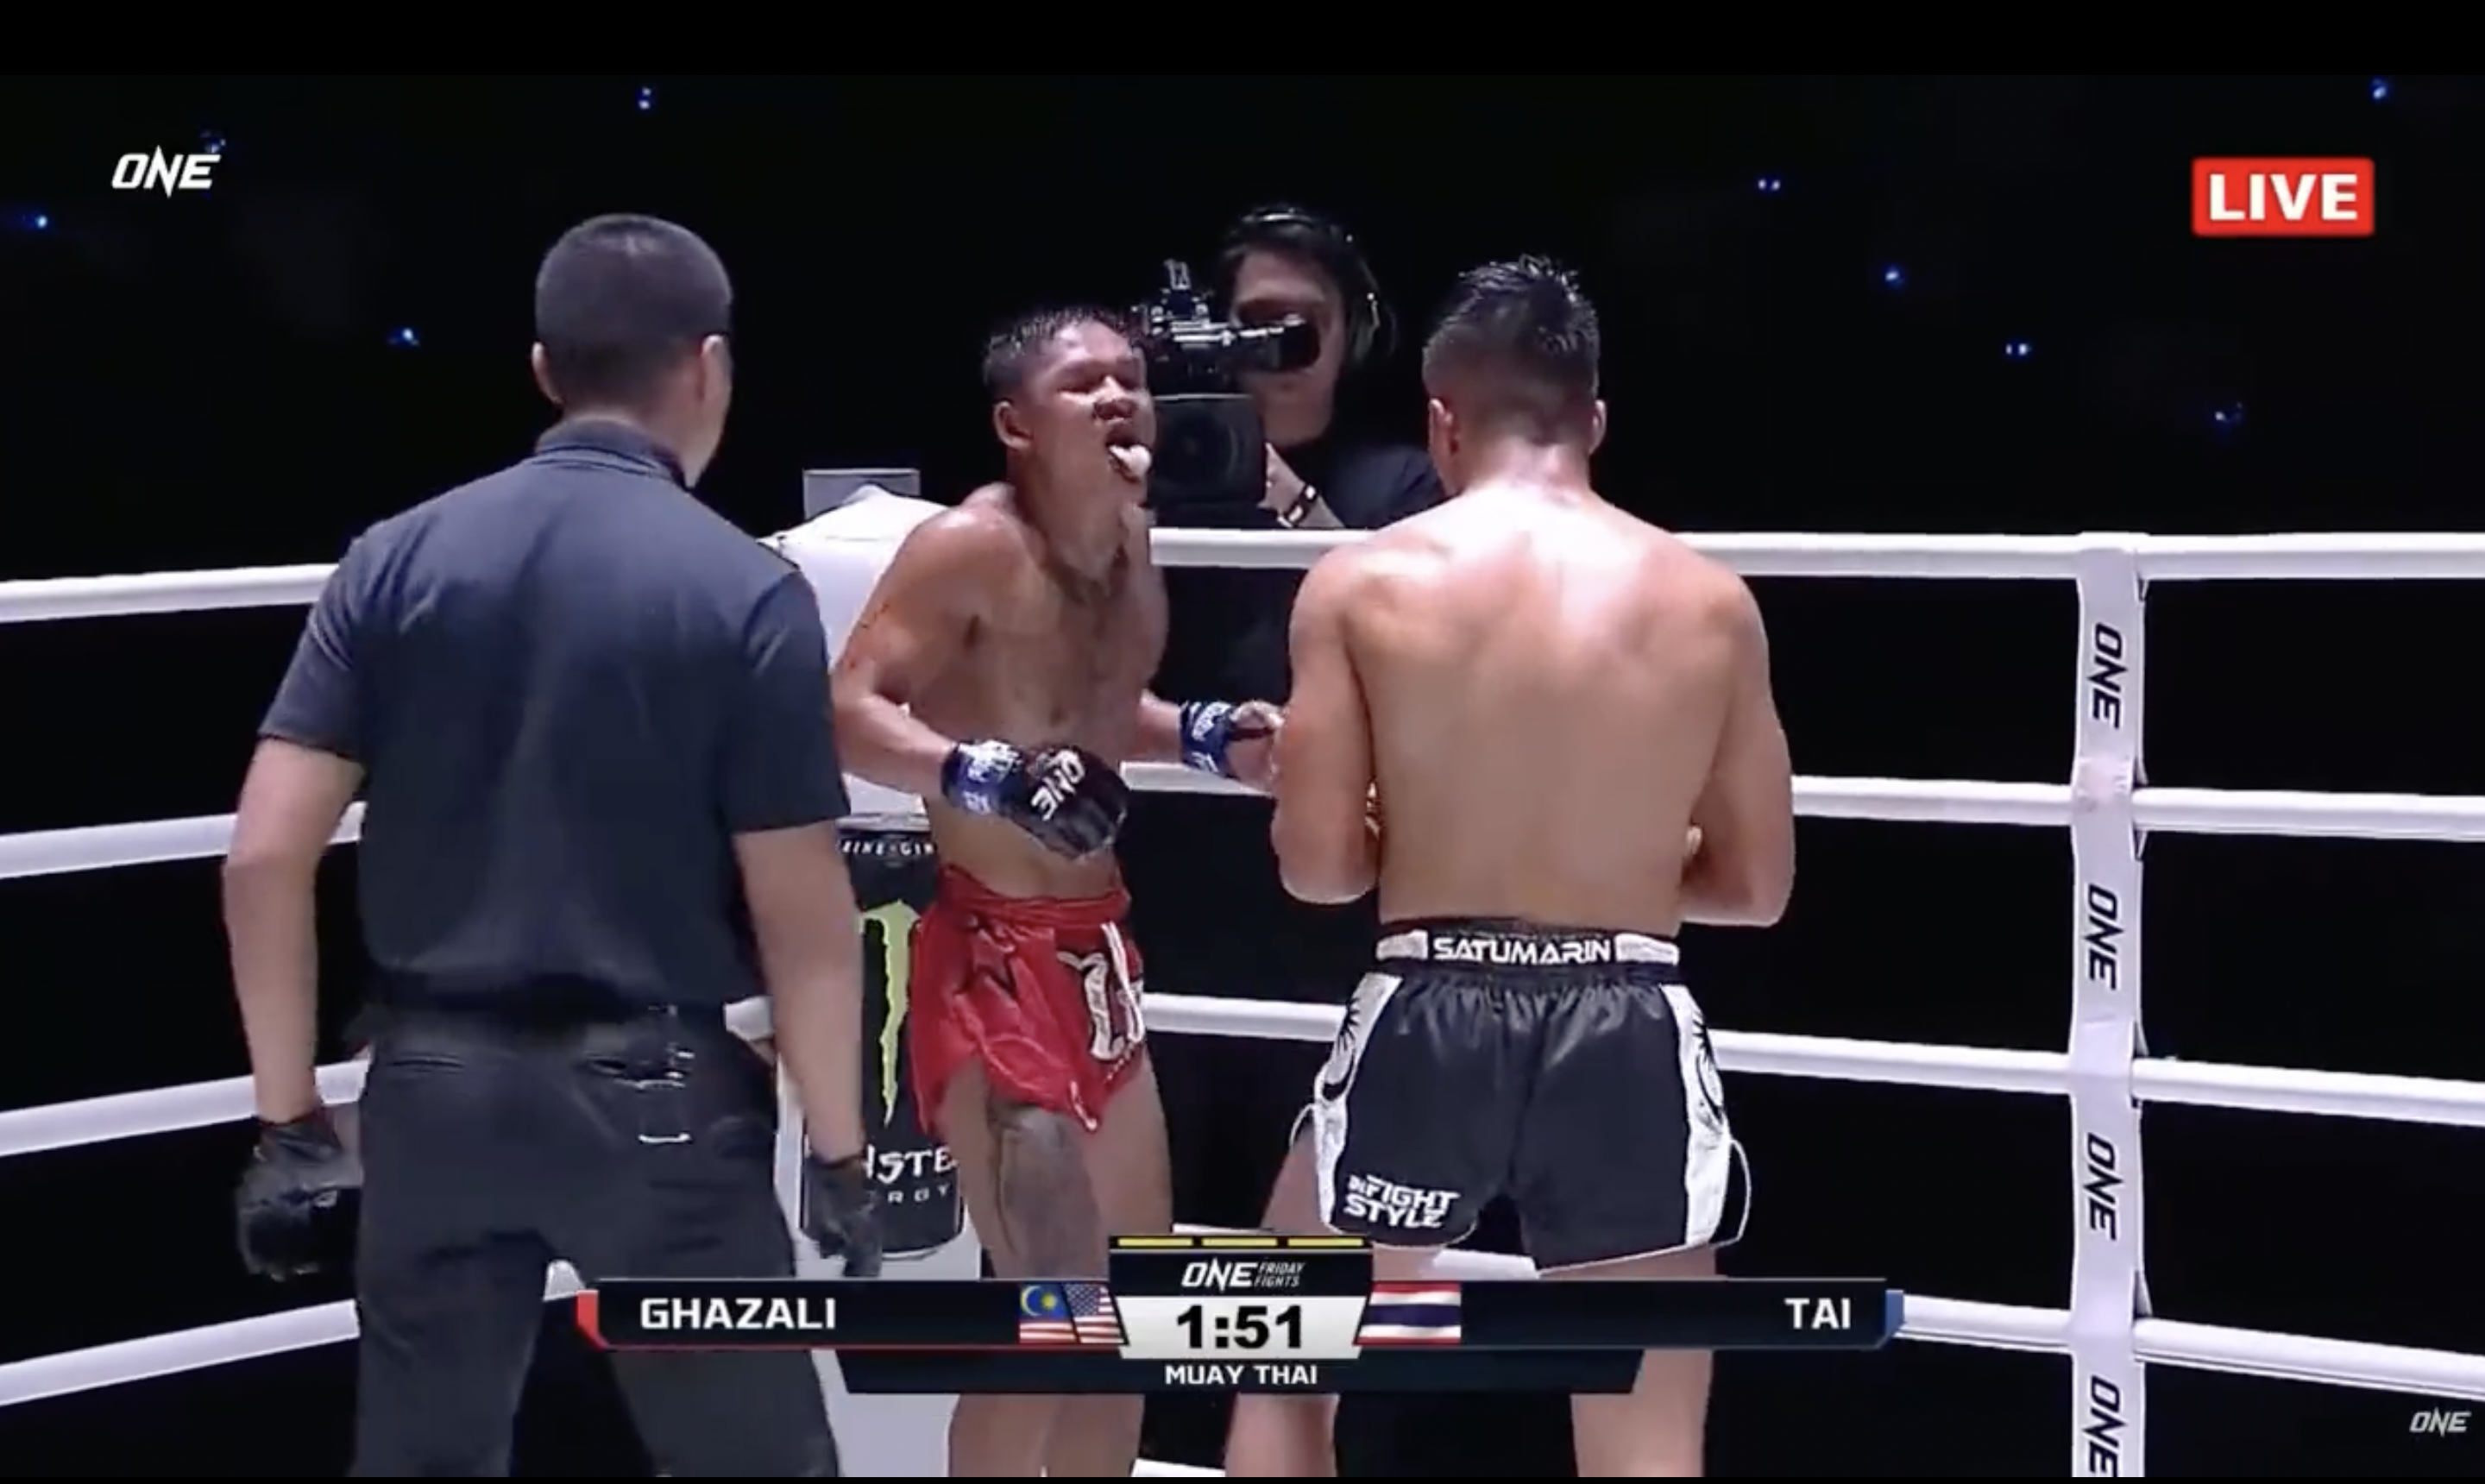 16yo m'sian muay thai fighter scores resounding victory with knockout blow on opponent